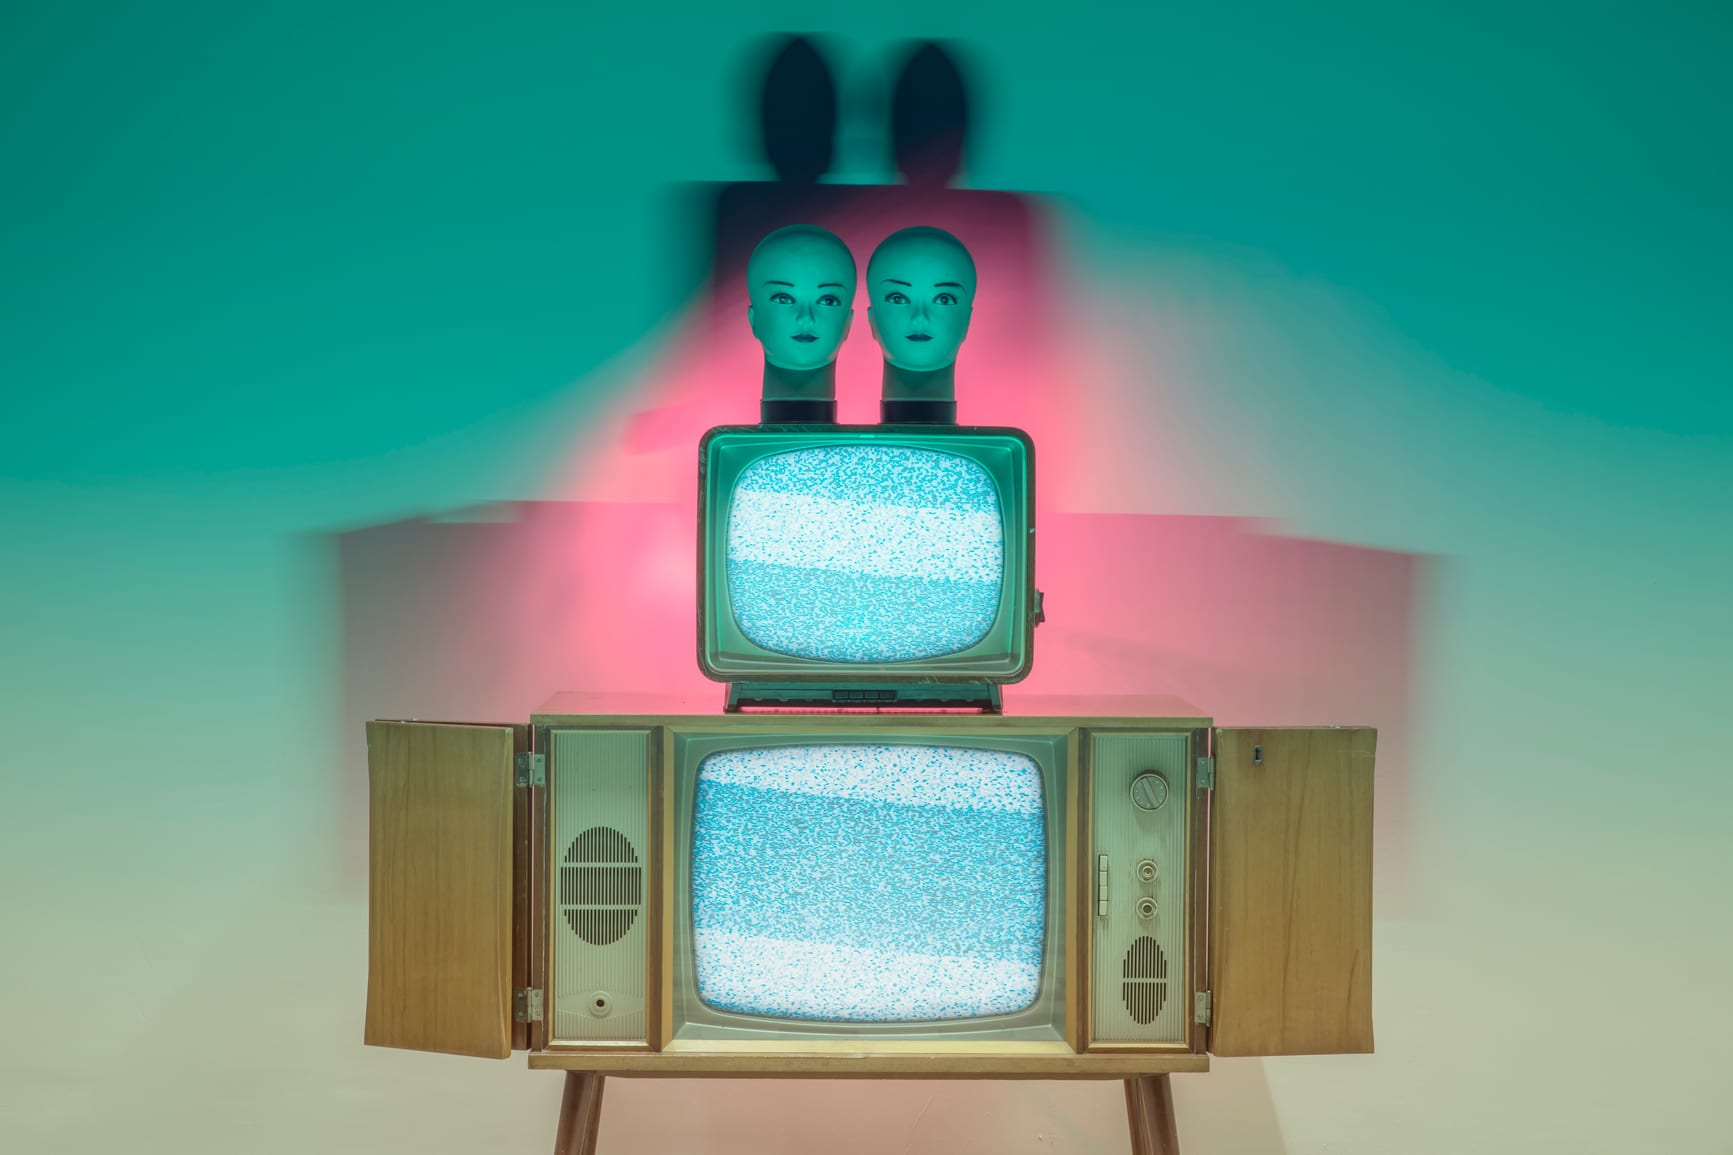 neon light experiment with retro TVs and doll heads